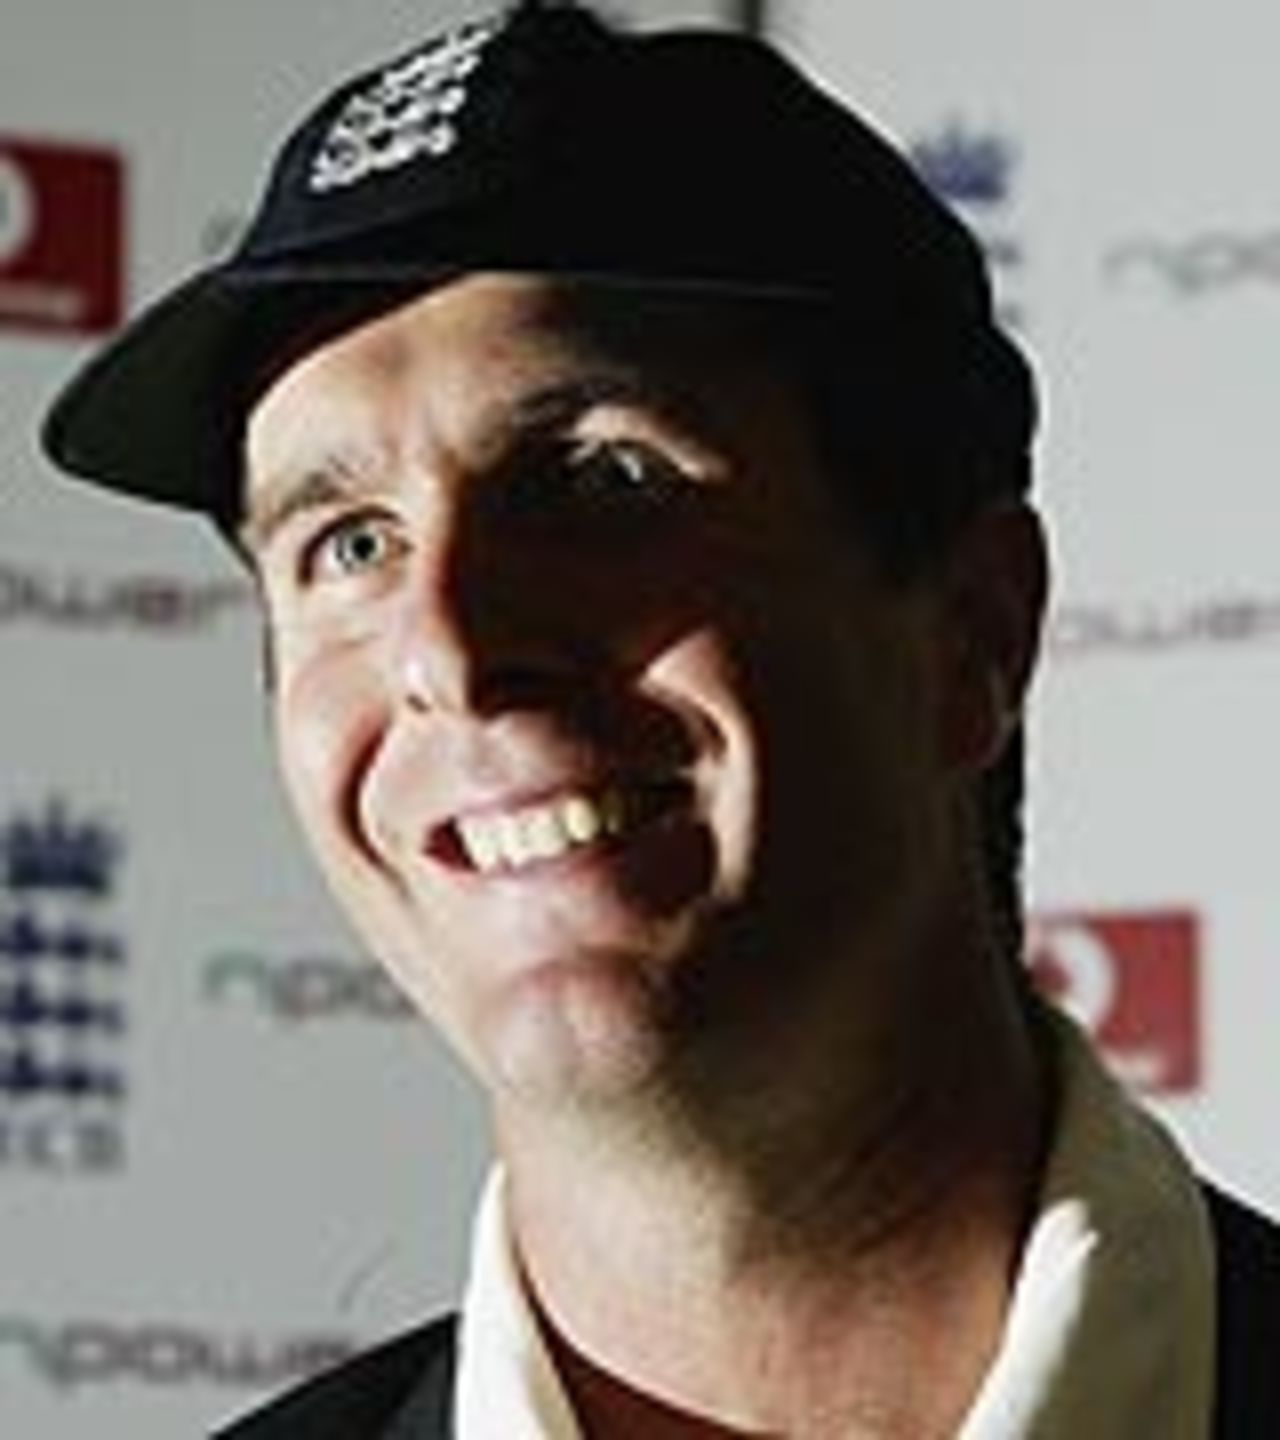 Michael Vaughan - became England captain in 2003